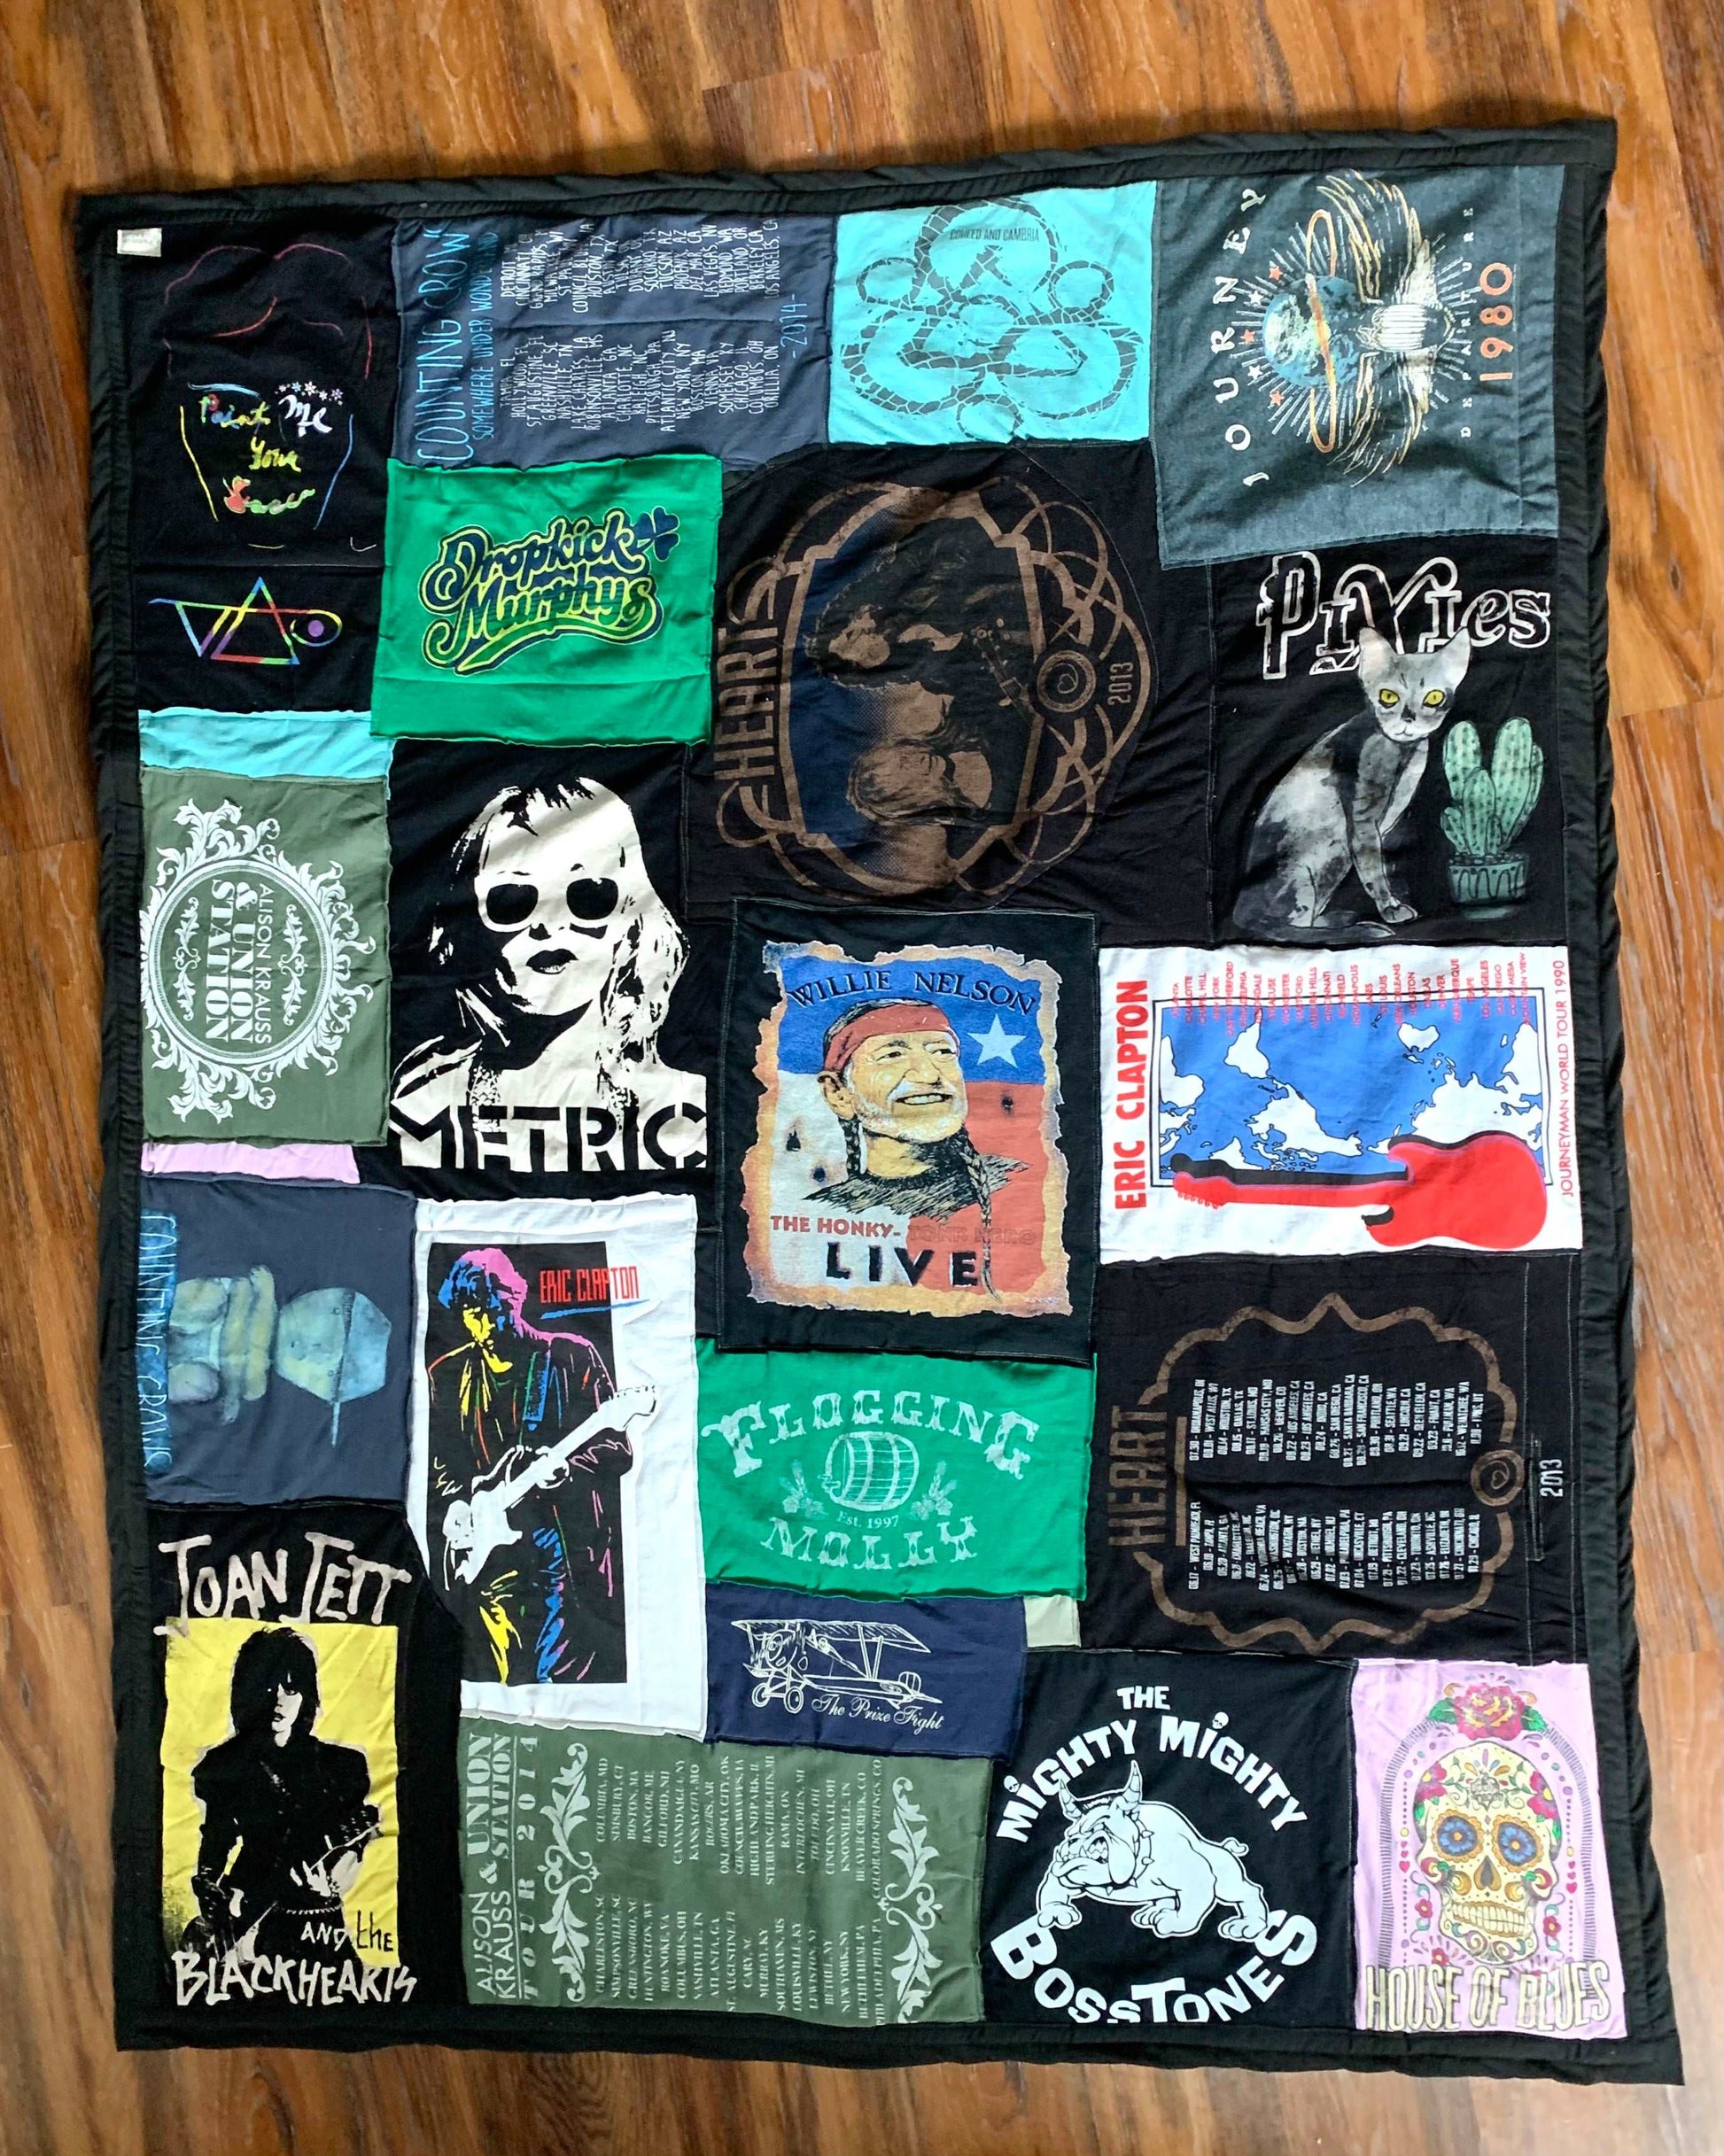 A collage tshirt custom quilt, with various bands: Metric, Dropkick Murphys, Joan Jett, Pixies, Journey, Might Might Bosstones, Heart, Flogging Molly